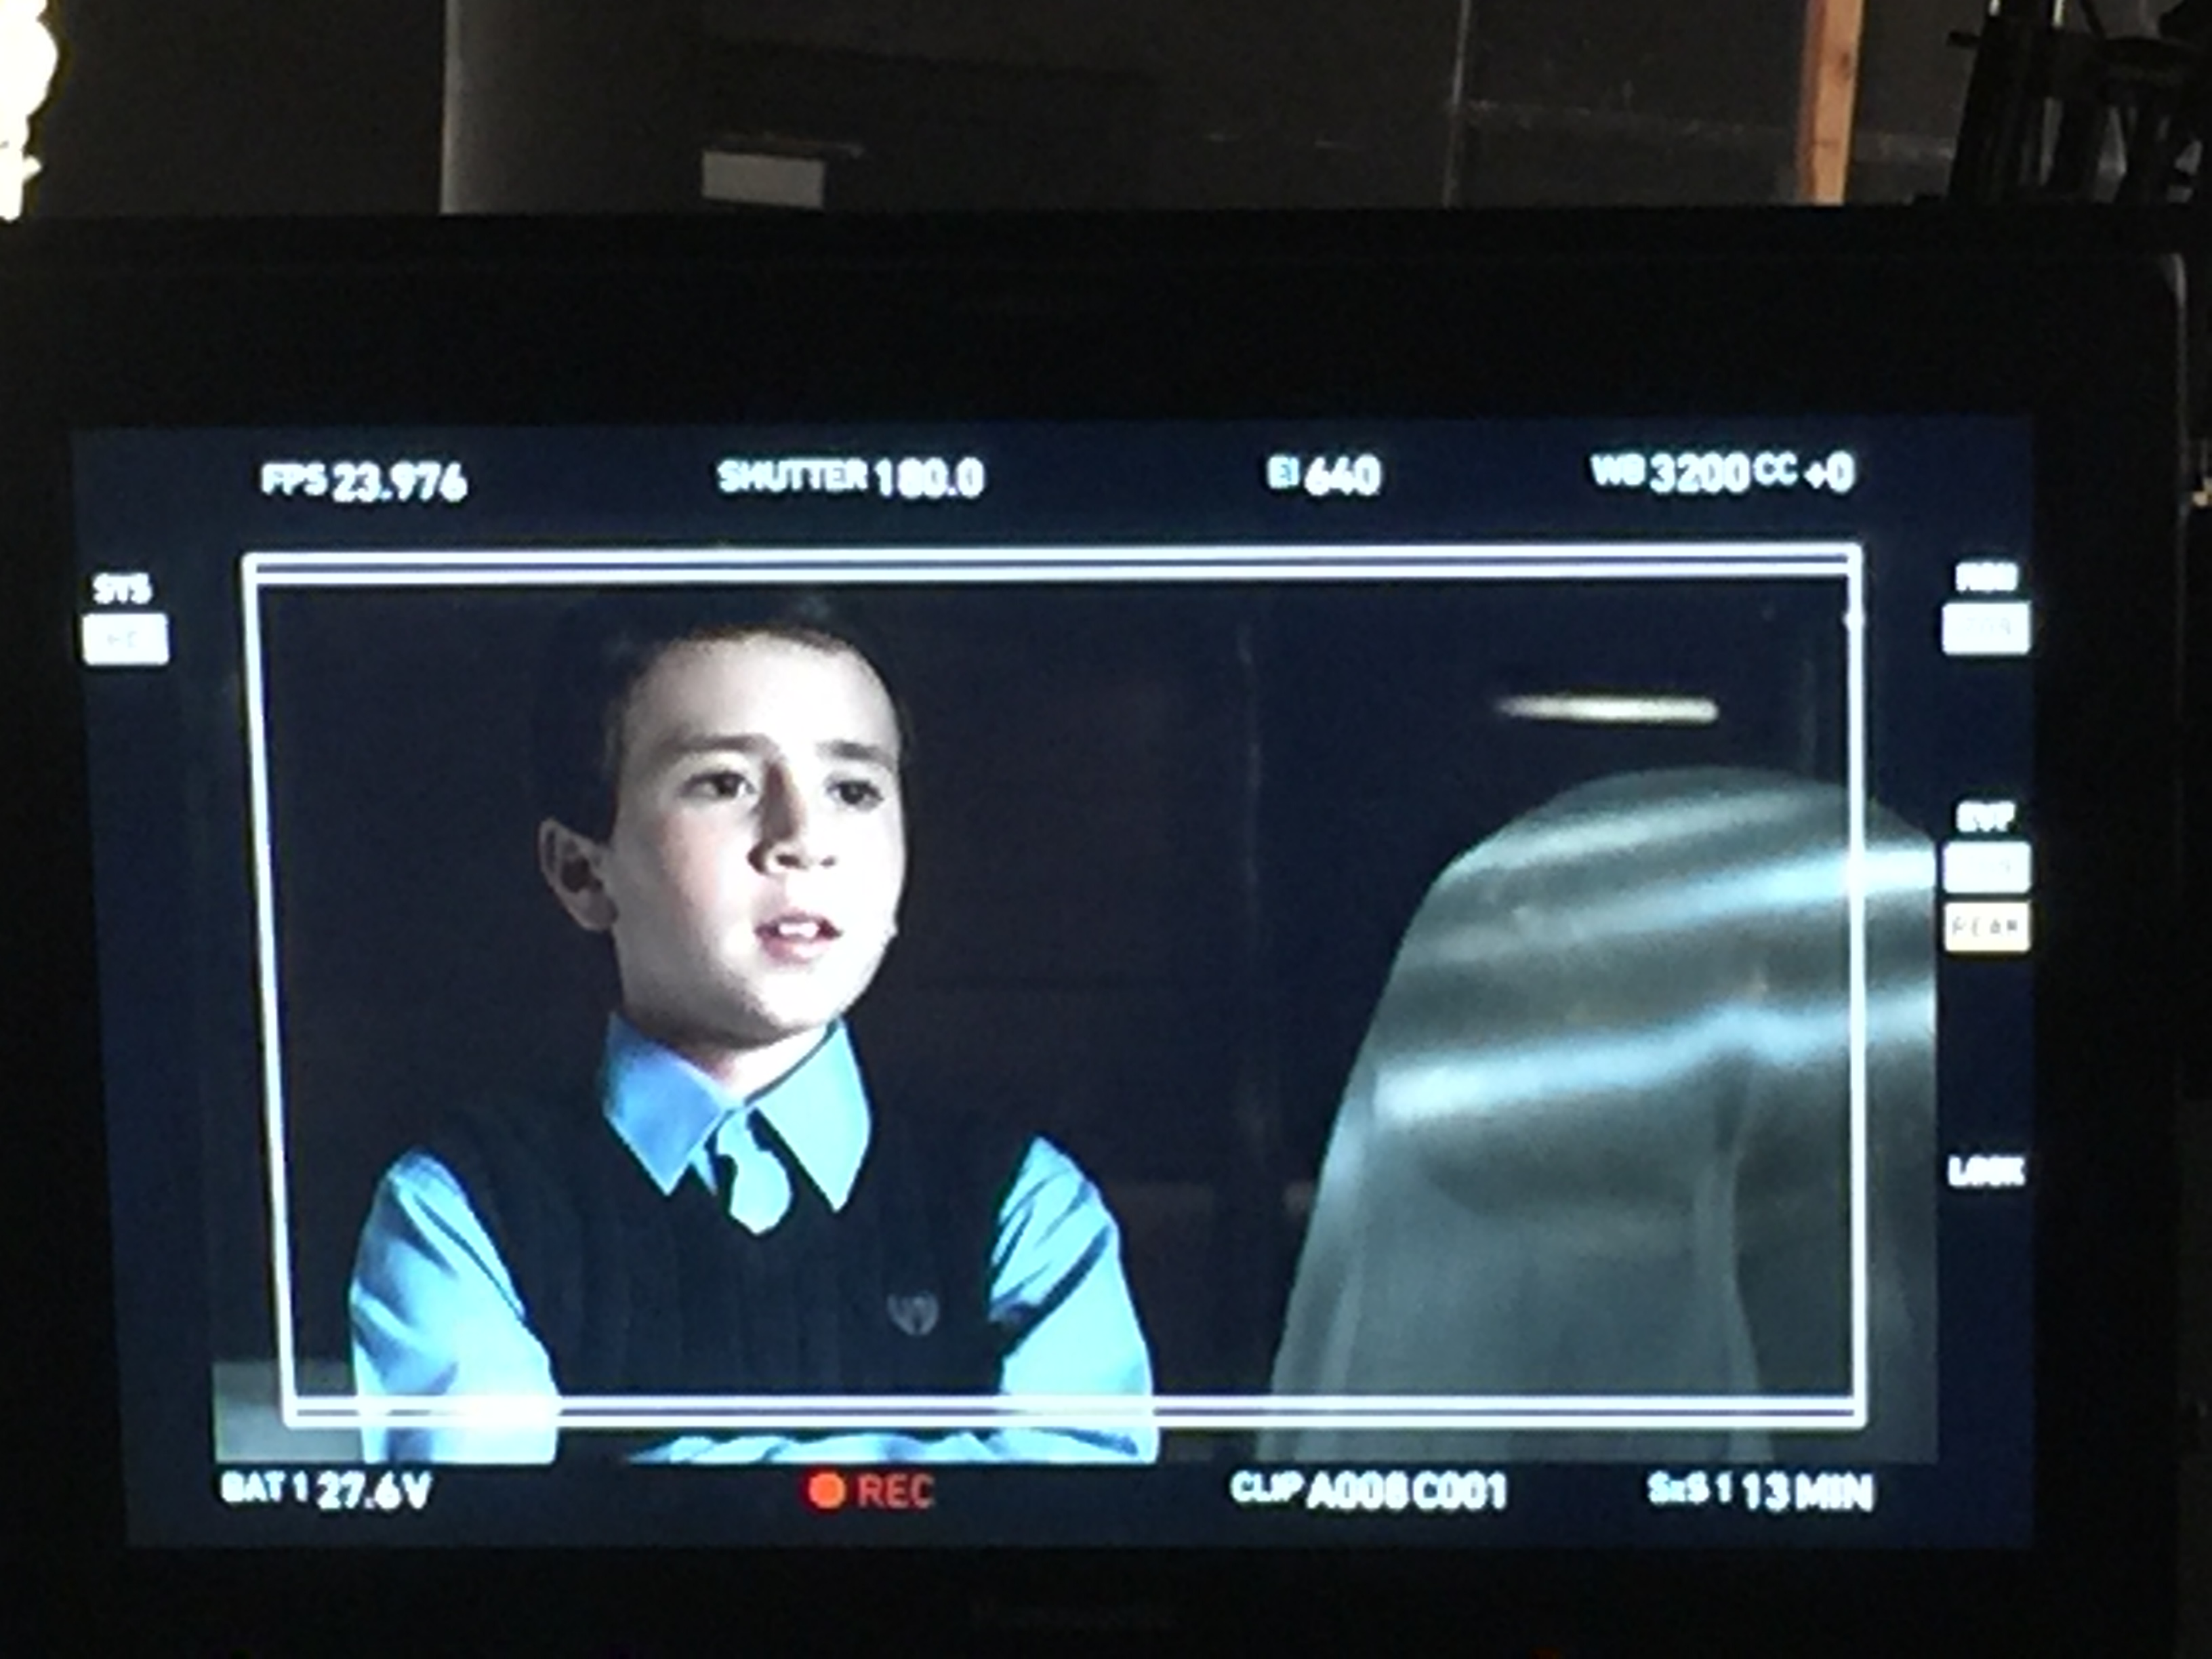 On the set of The Doll that Aged where Jordan played the role: Henry